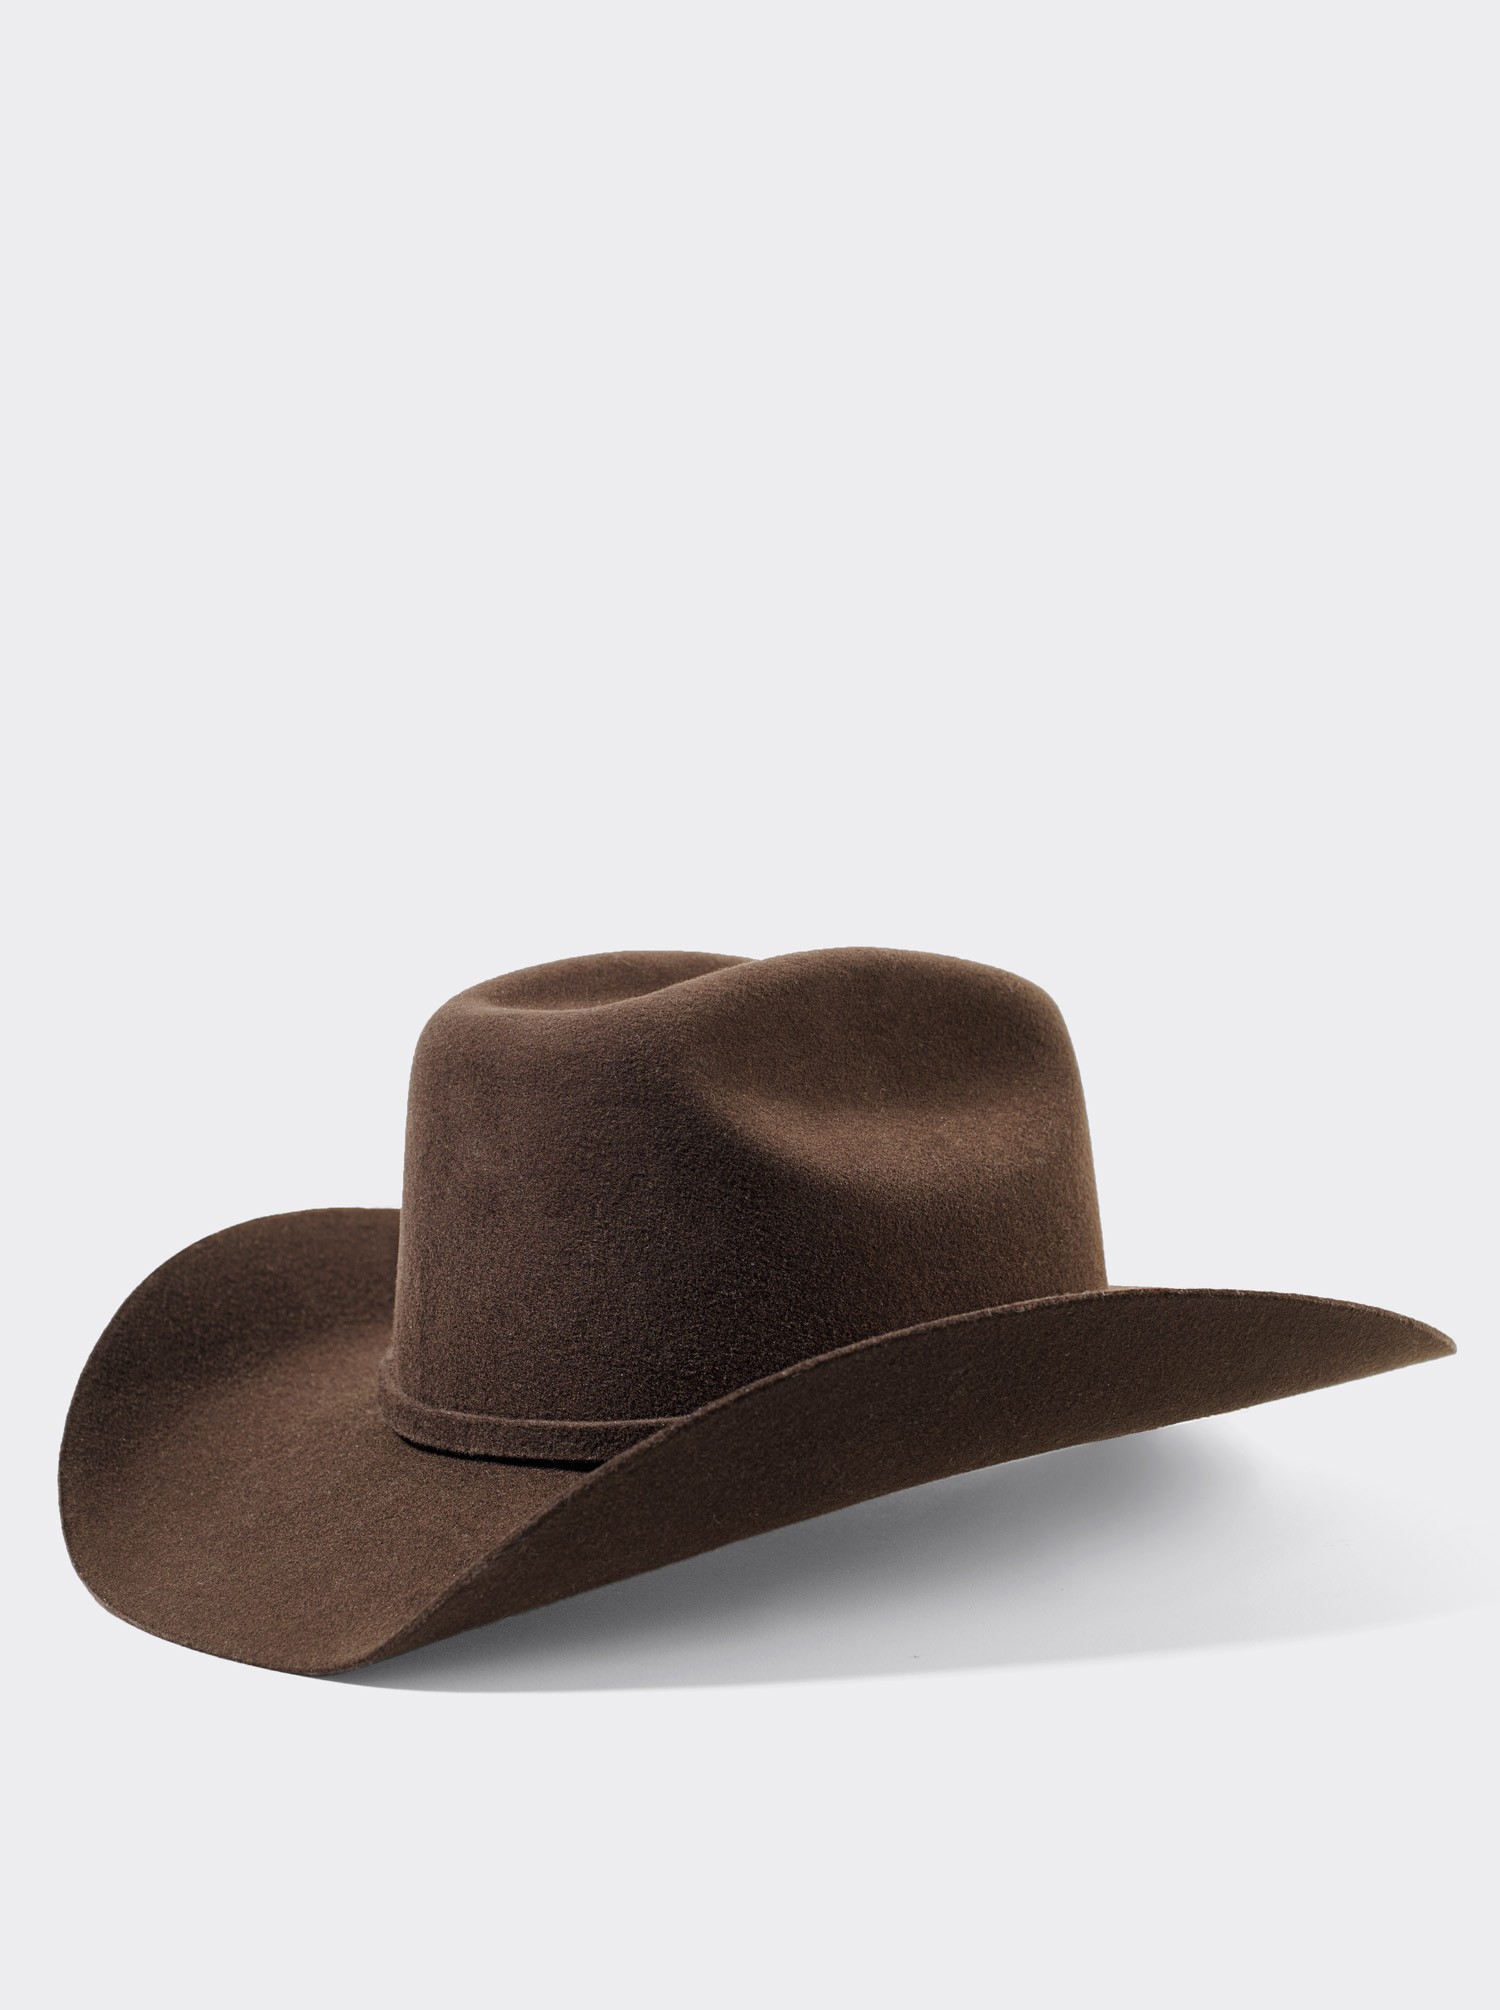 Texana Style Cowboy Hat in Chocolate Wool